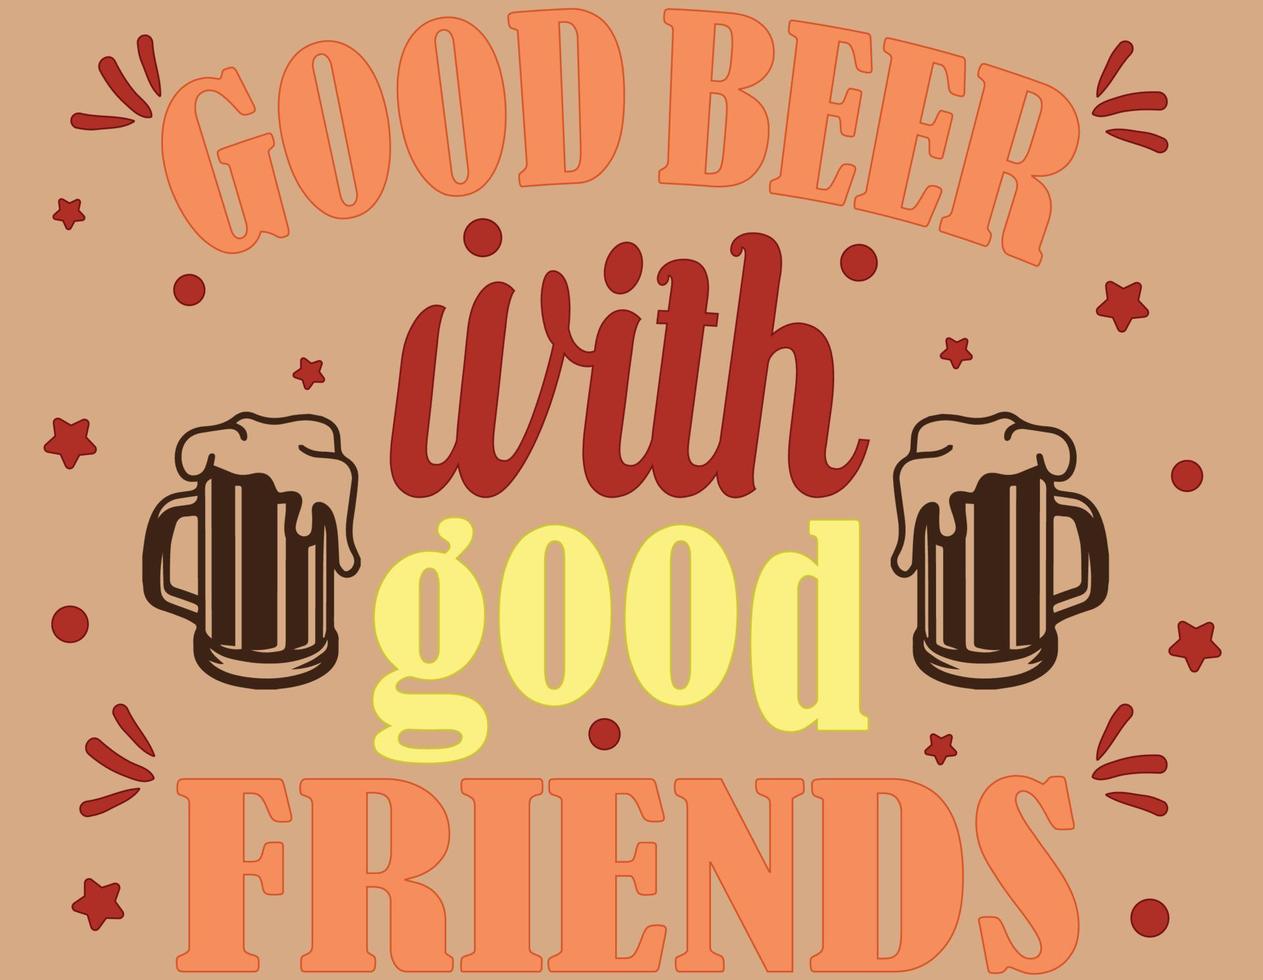 Good Beer With Good Friends Vector illustration of lettering about friendship. Modern calligraphy phrase about friends. Inspirational quotes. Usable as greeting cards, posters. Best friends forever